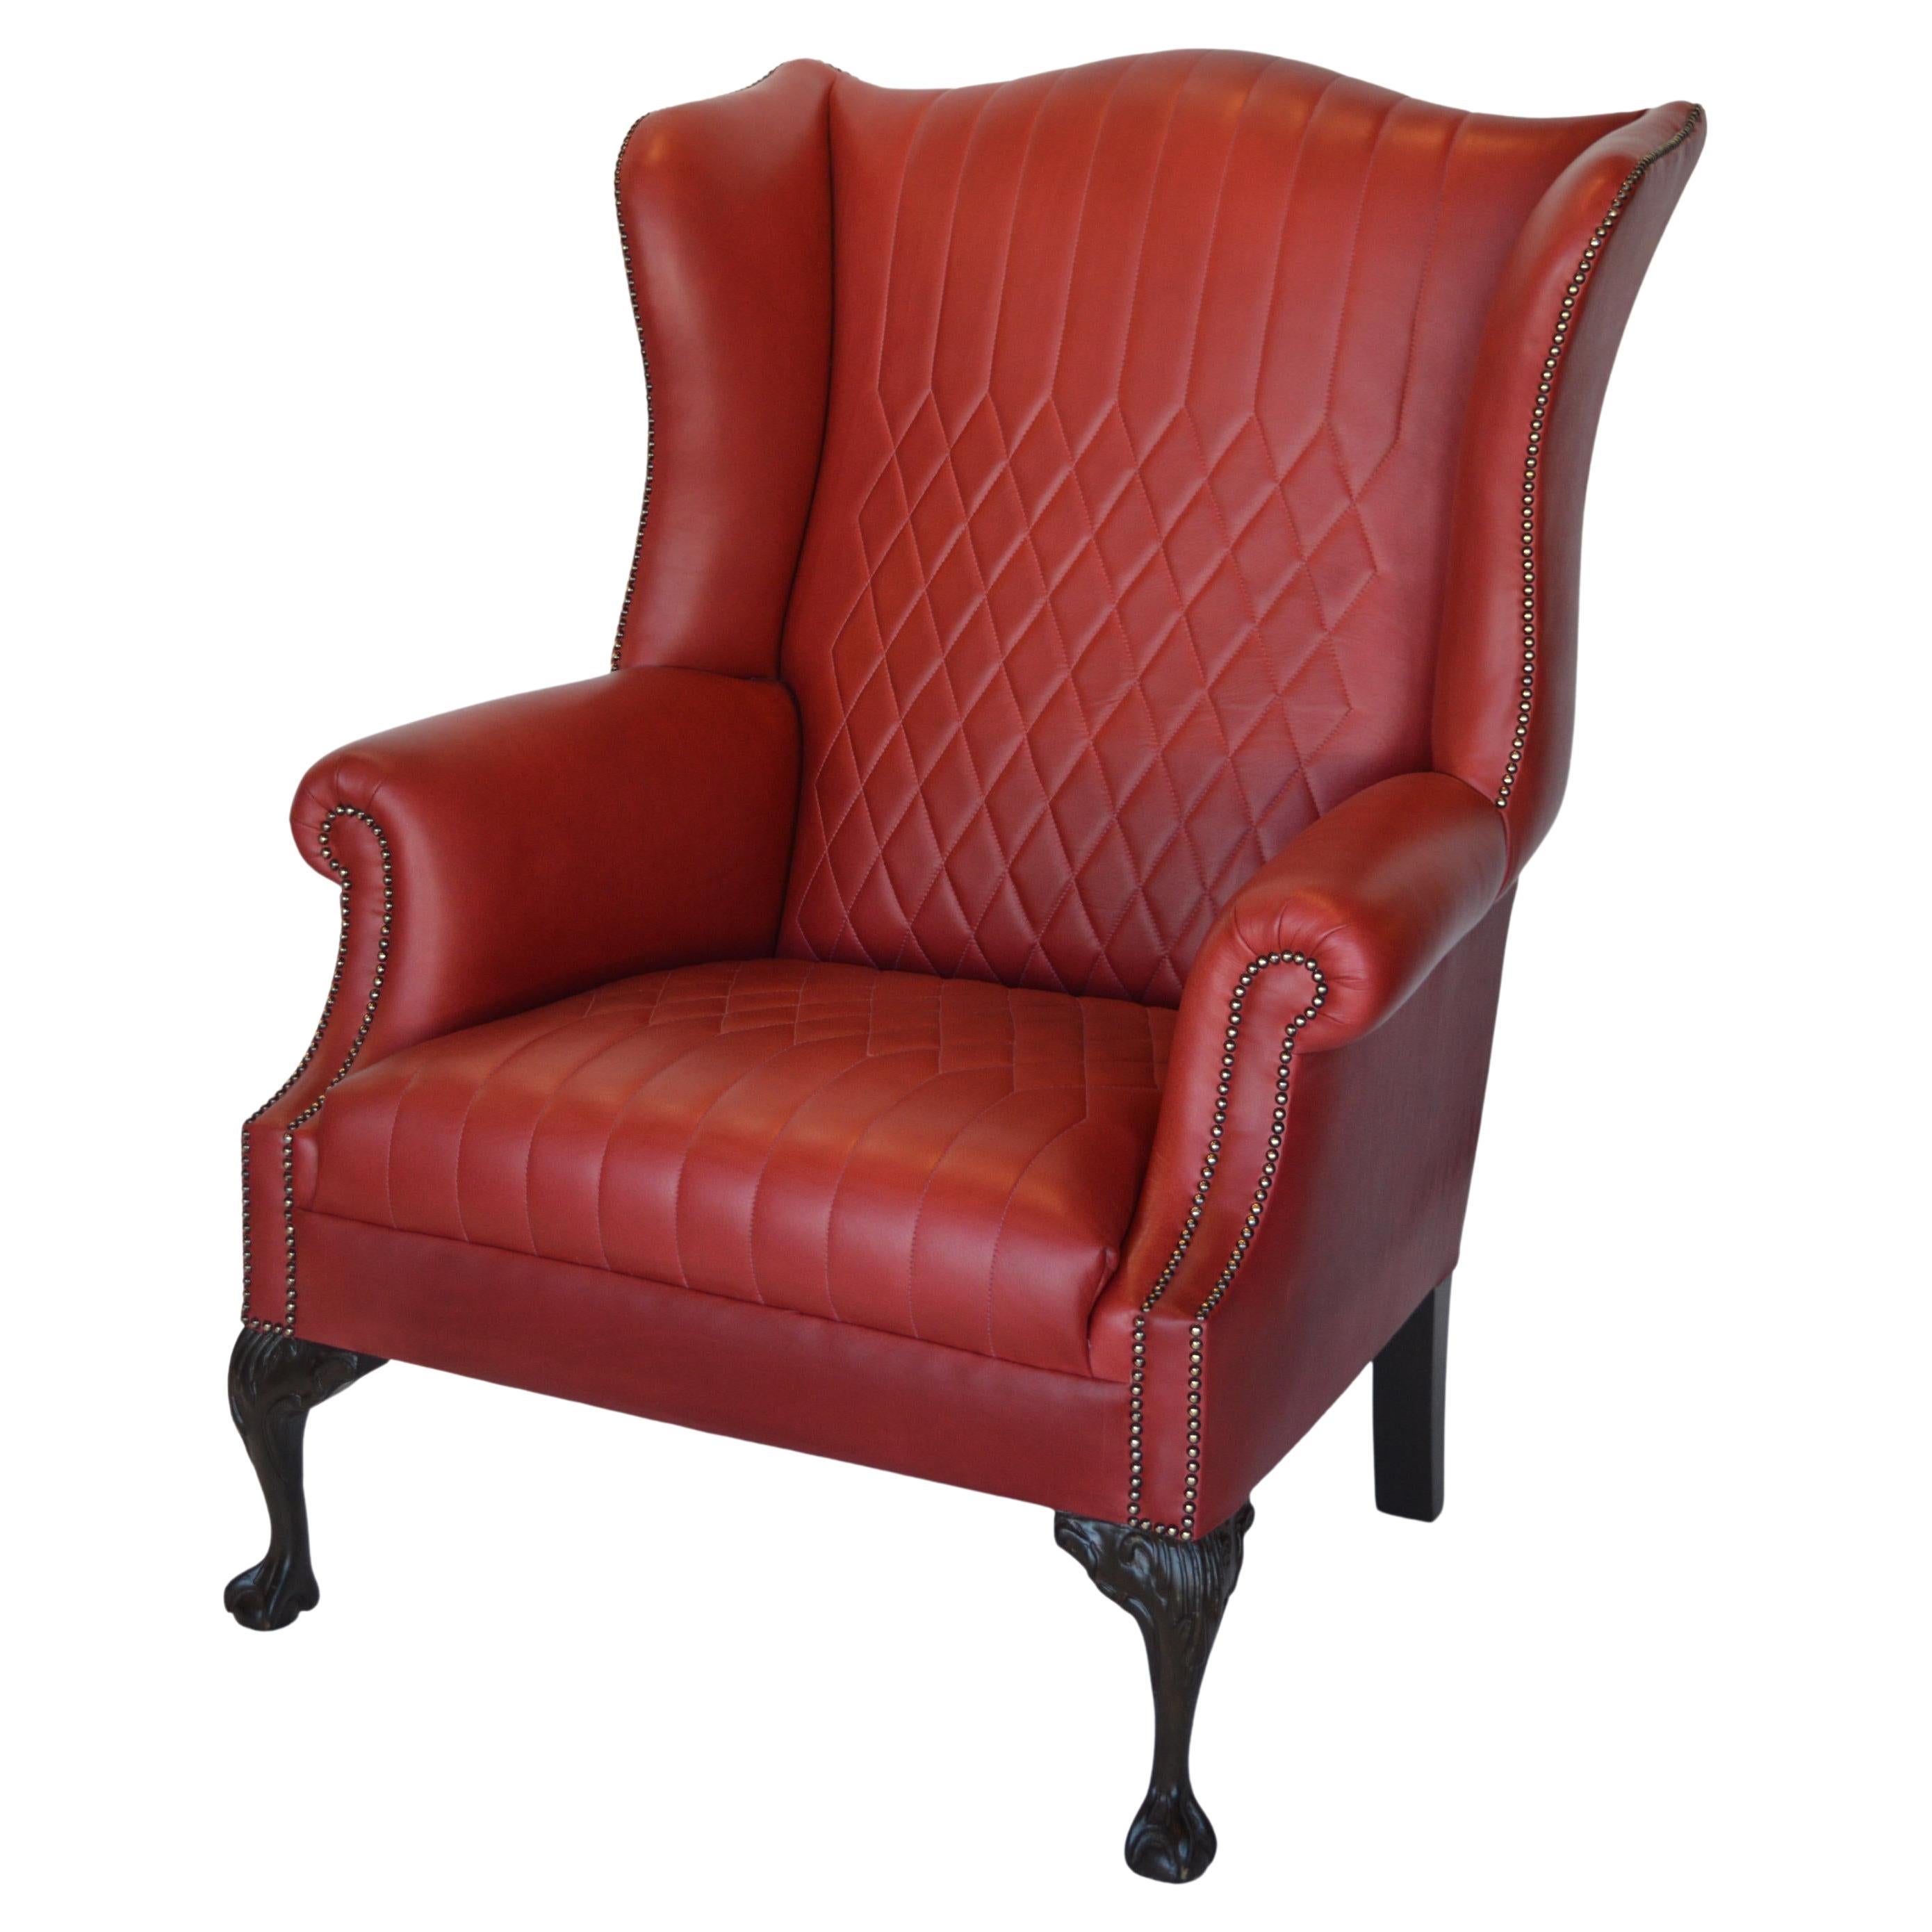 Late 19th Century, English Wingback Leather Chair